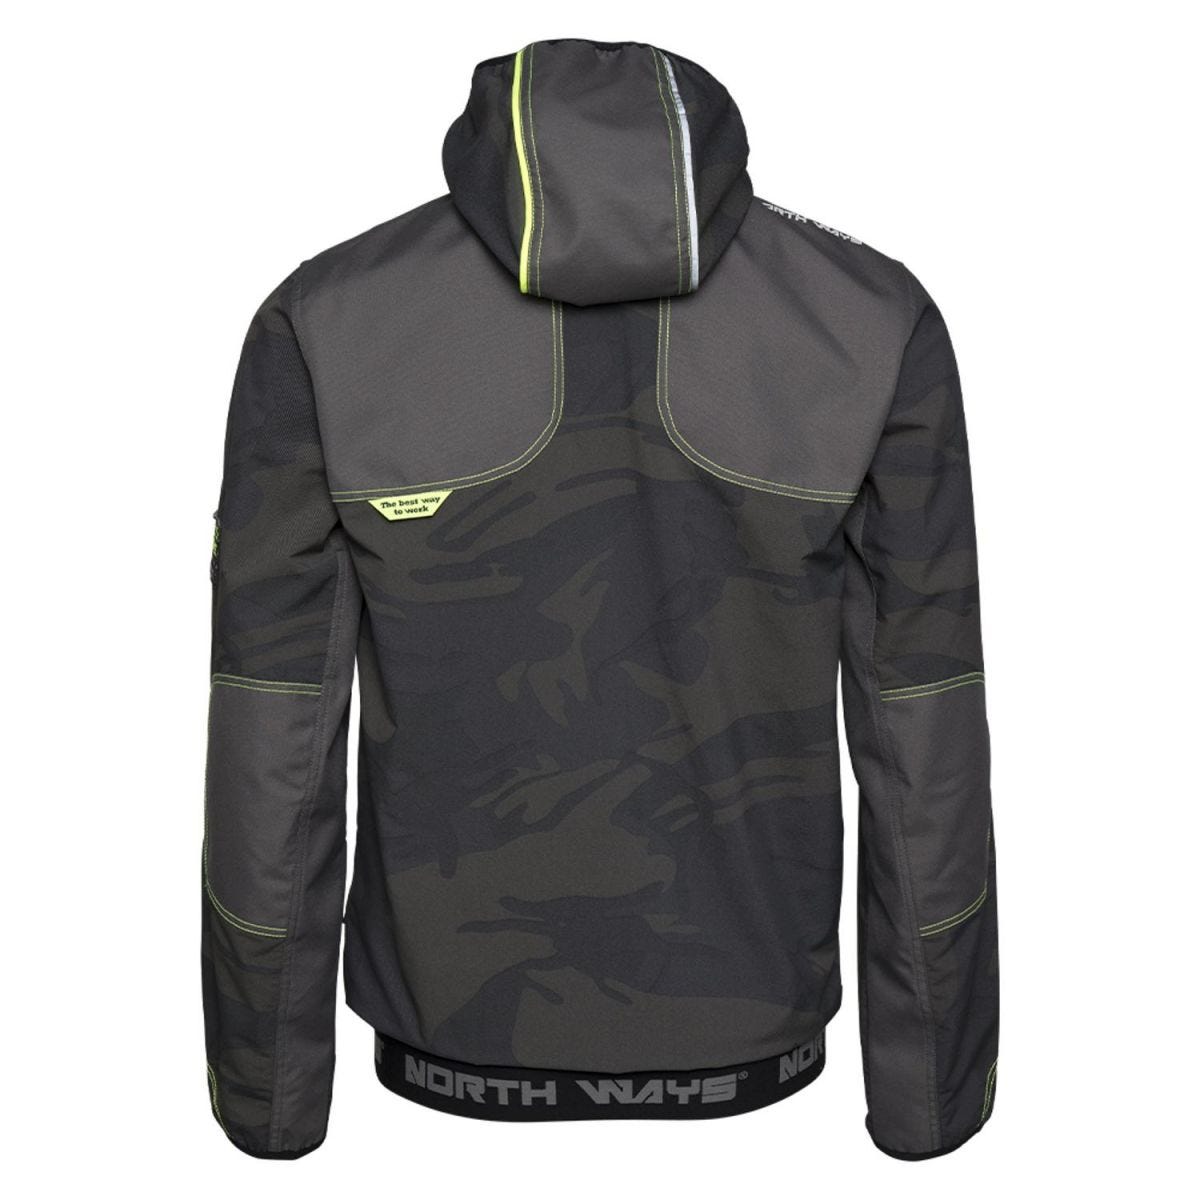 Blouson de travail multipoches Irons woodland - North Ways - Taille L 2